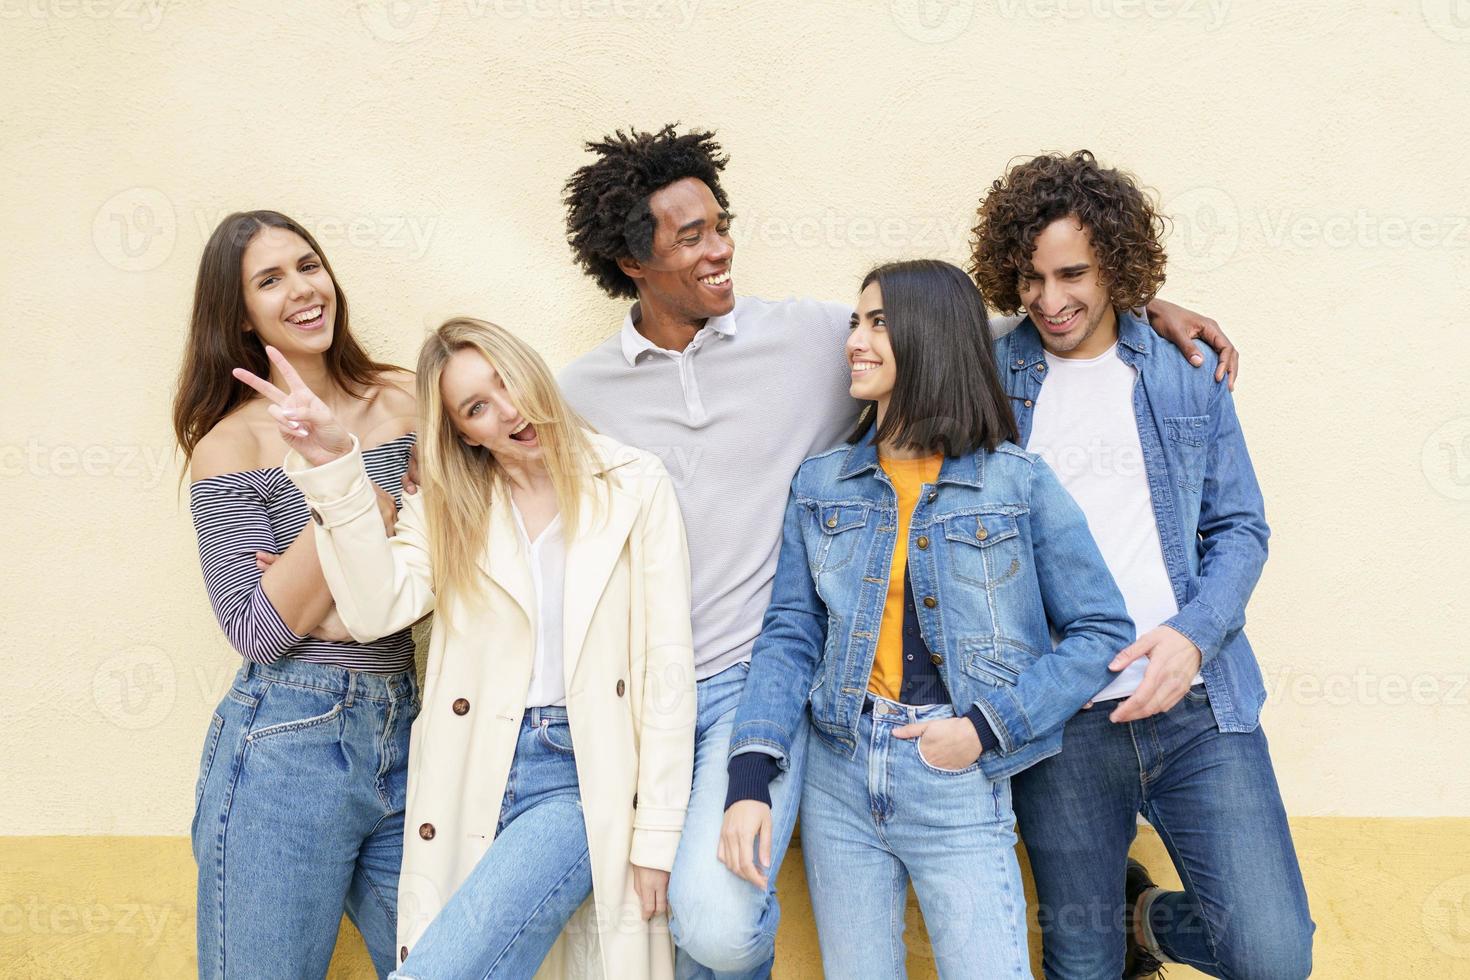 Multi-ethnic group of friends posing while having fun and laughing together photo